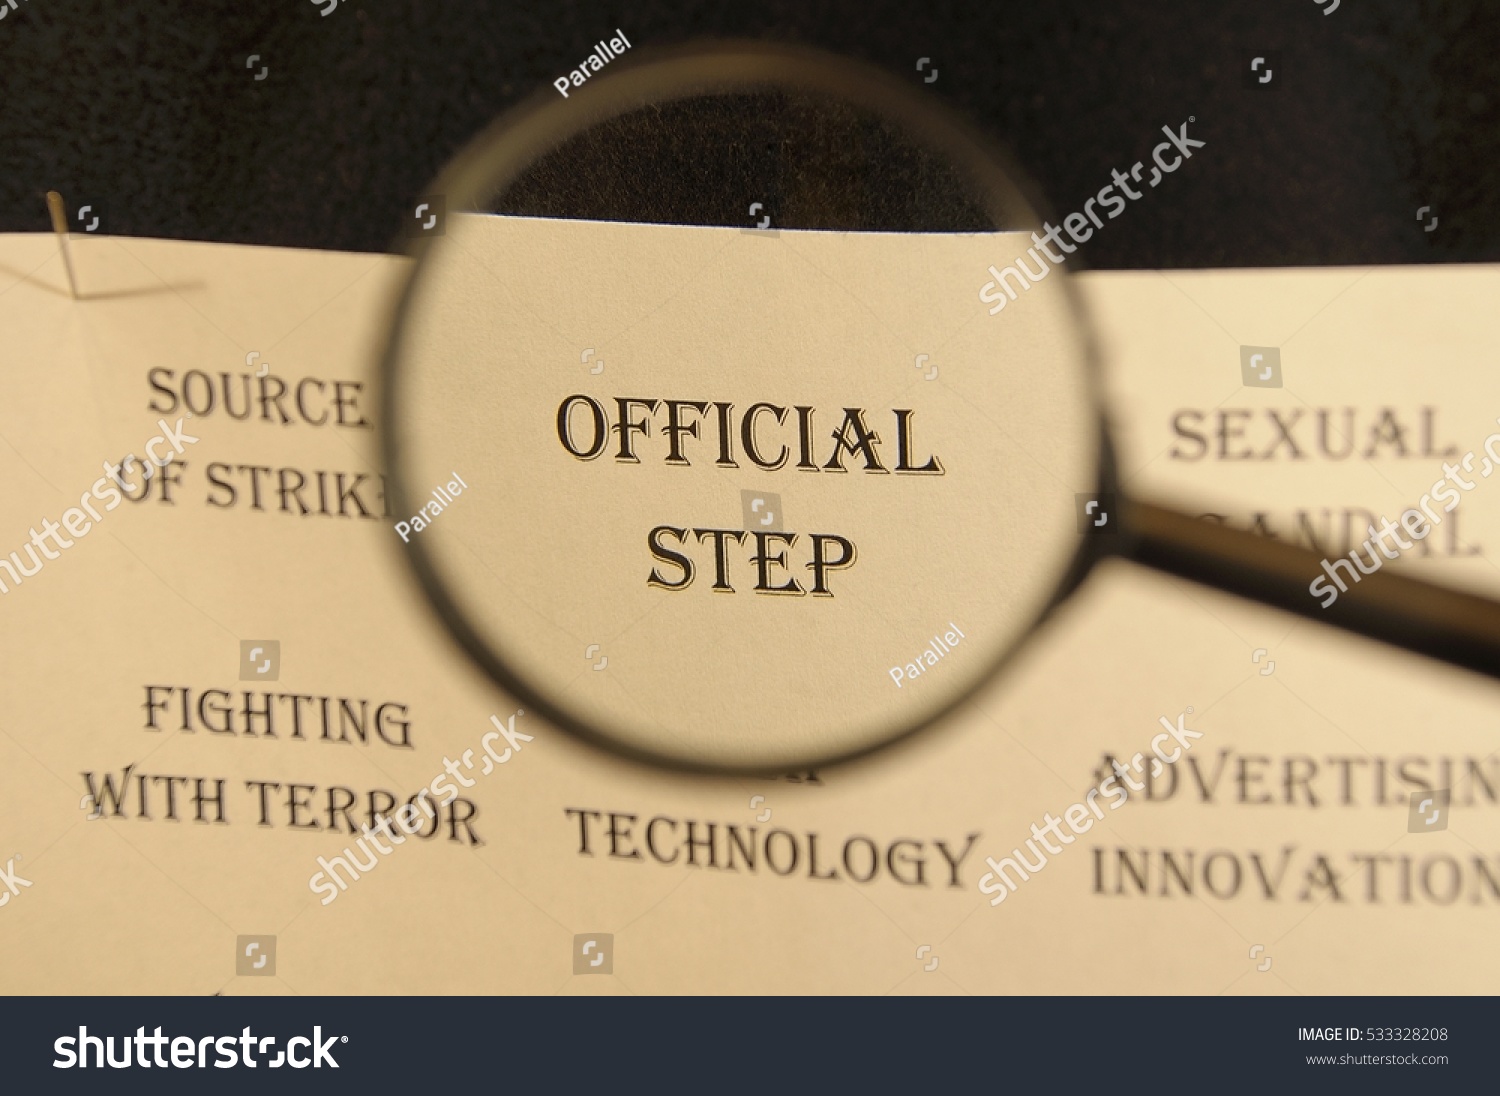 Text - headline of newspaper article - at loupe. Words "Official step" #533328208